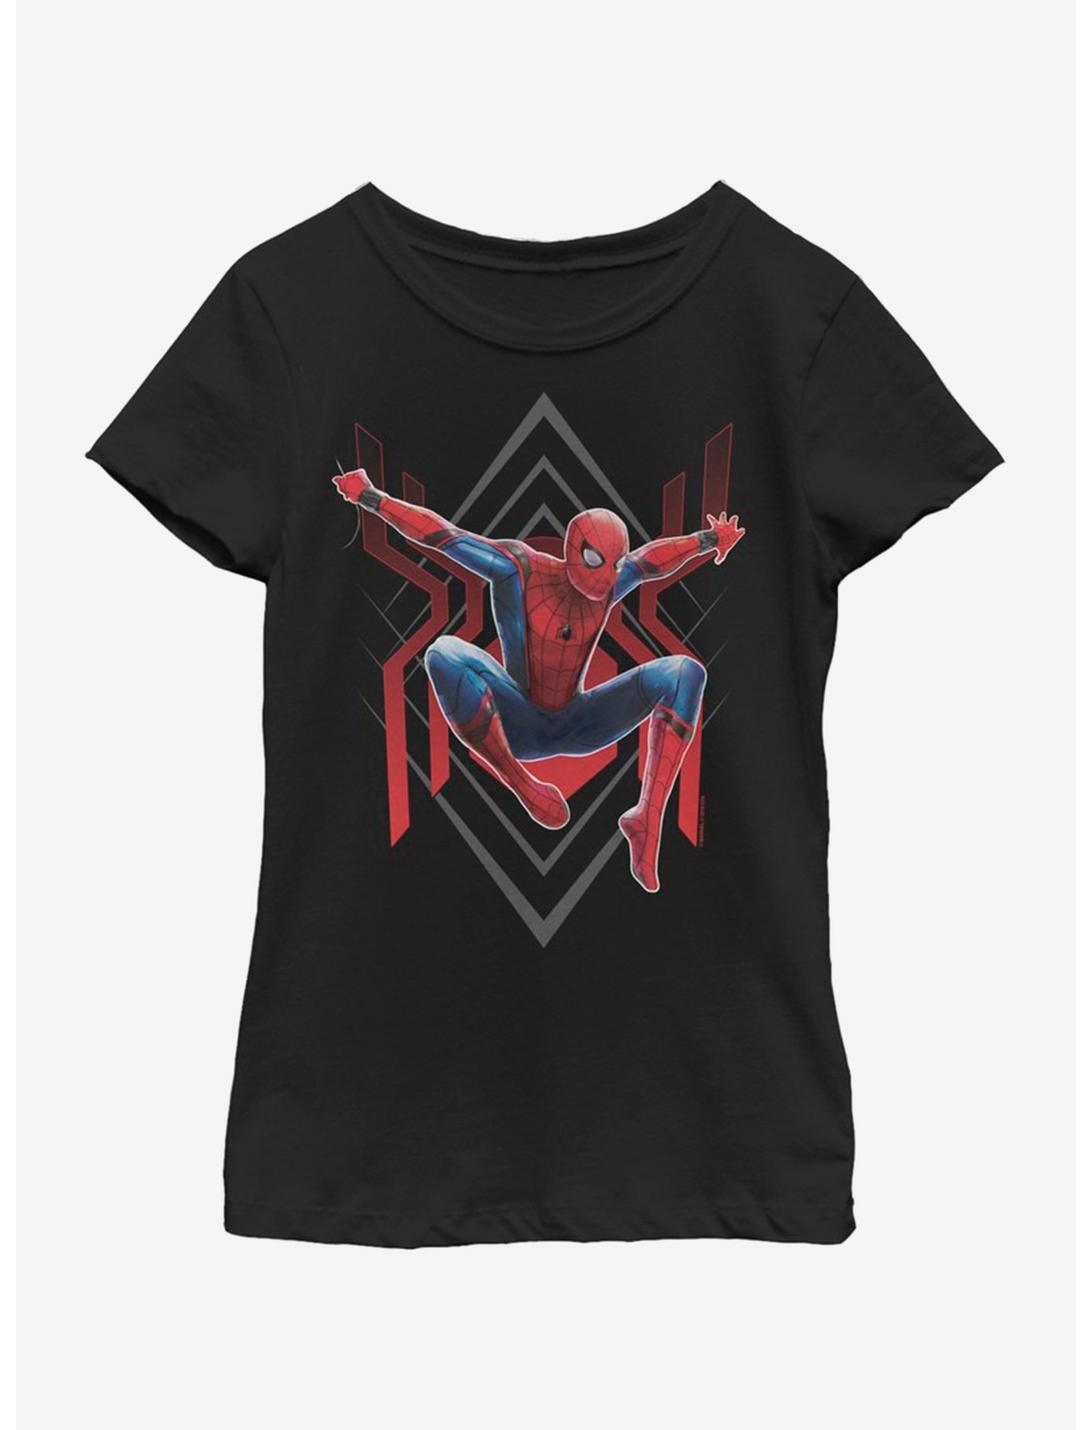 Marvel Spiderman: Far From Home Spider Jump Youth Girls T-Shirt, BLACK, hi-res